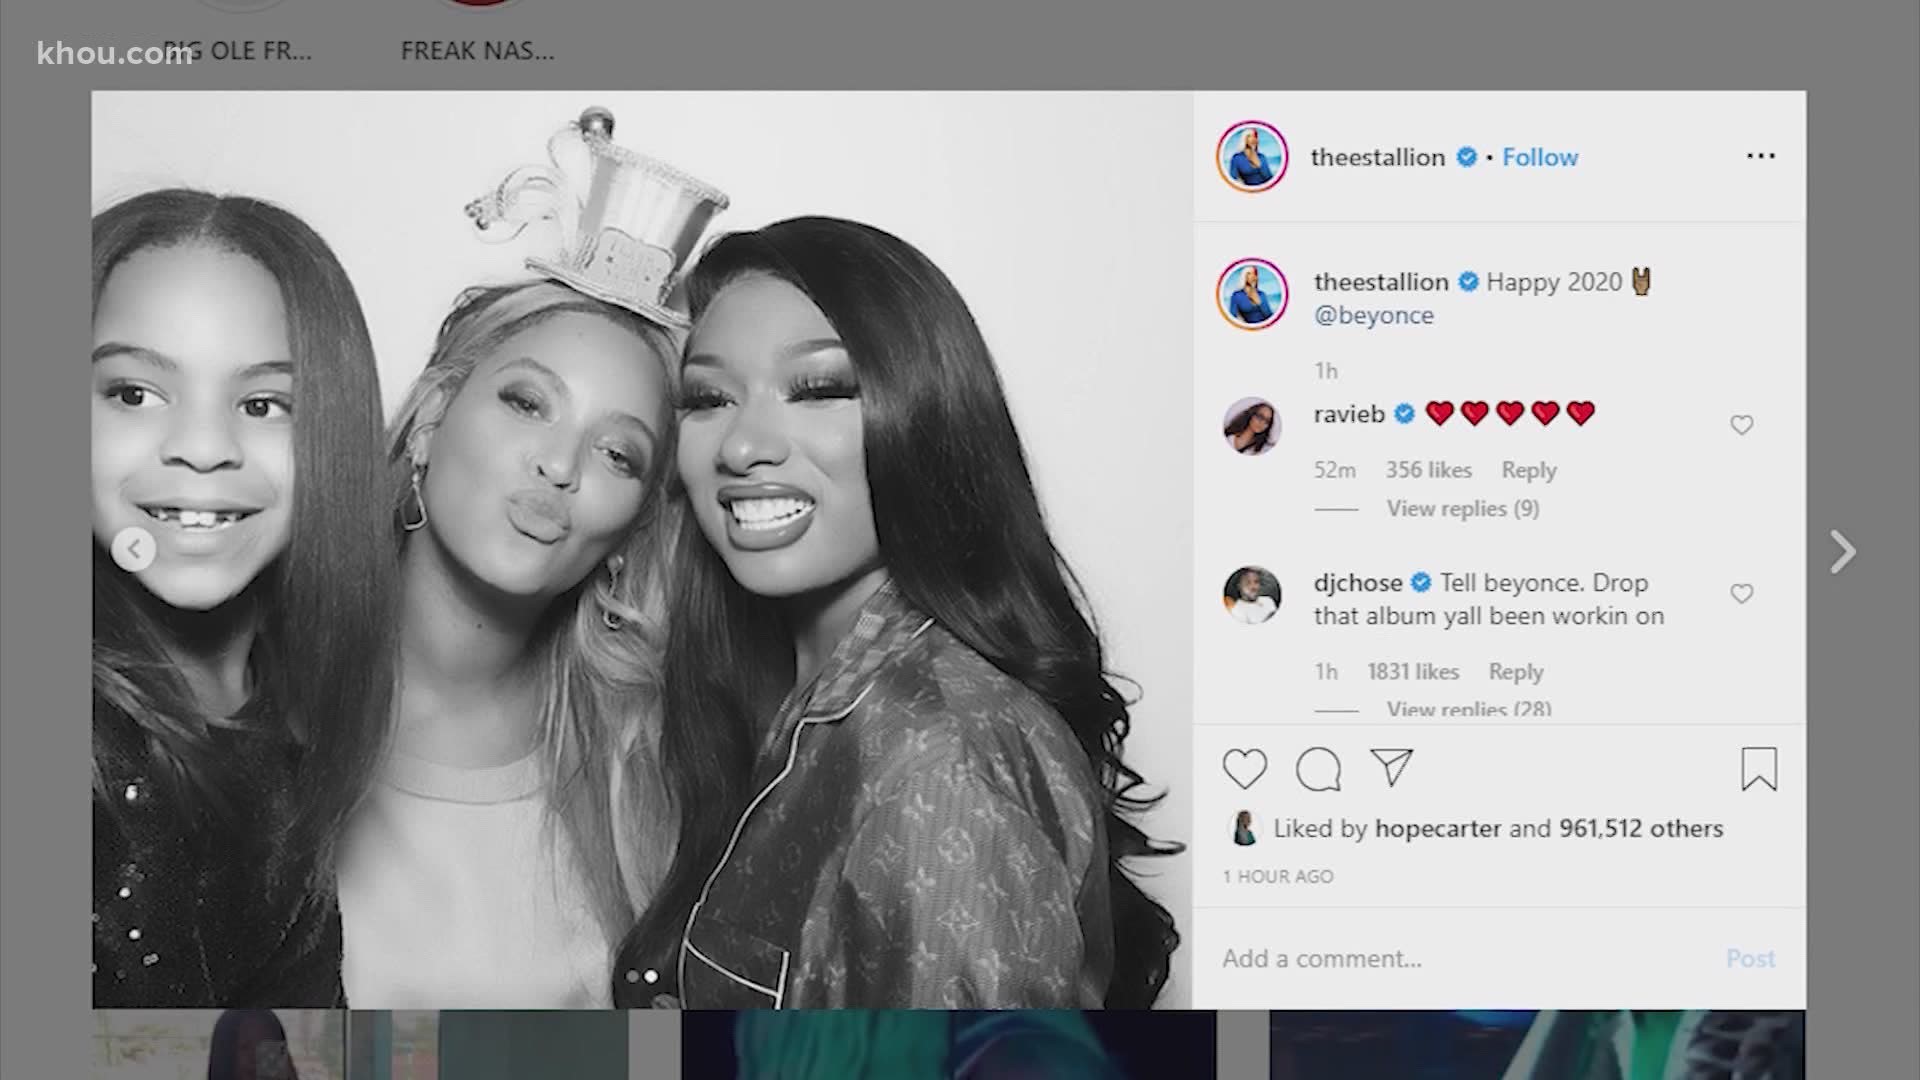 Houston's own Beyonce and Megan Thee Stallion broke the internet this week with their new collaboration on “Savage.”